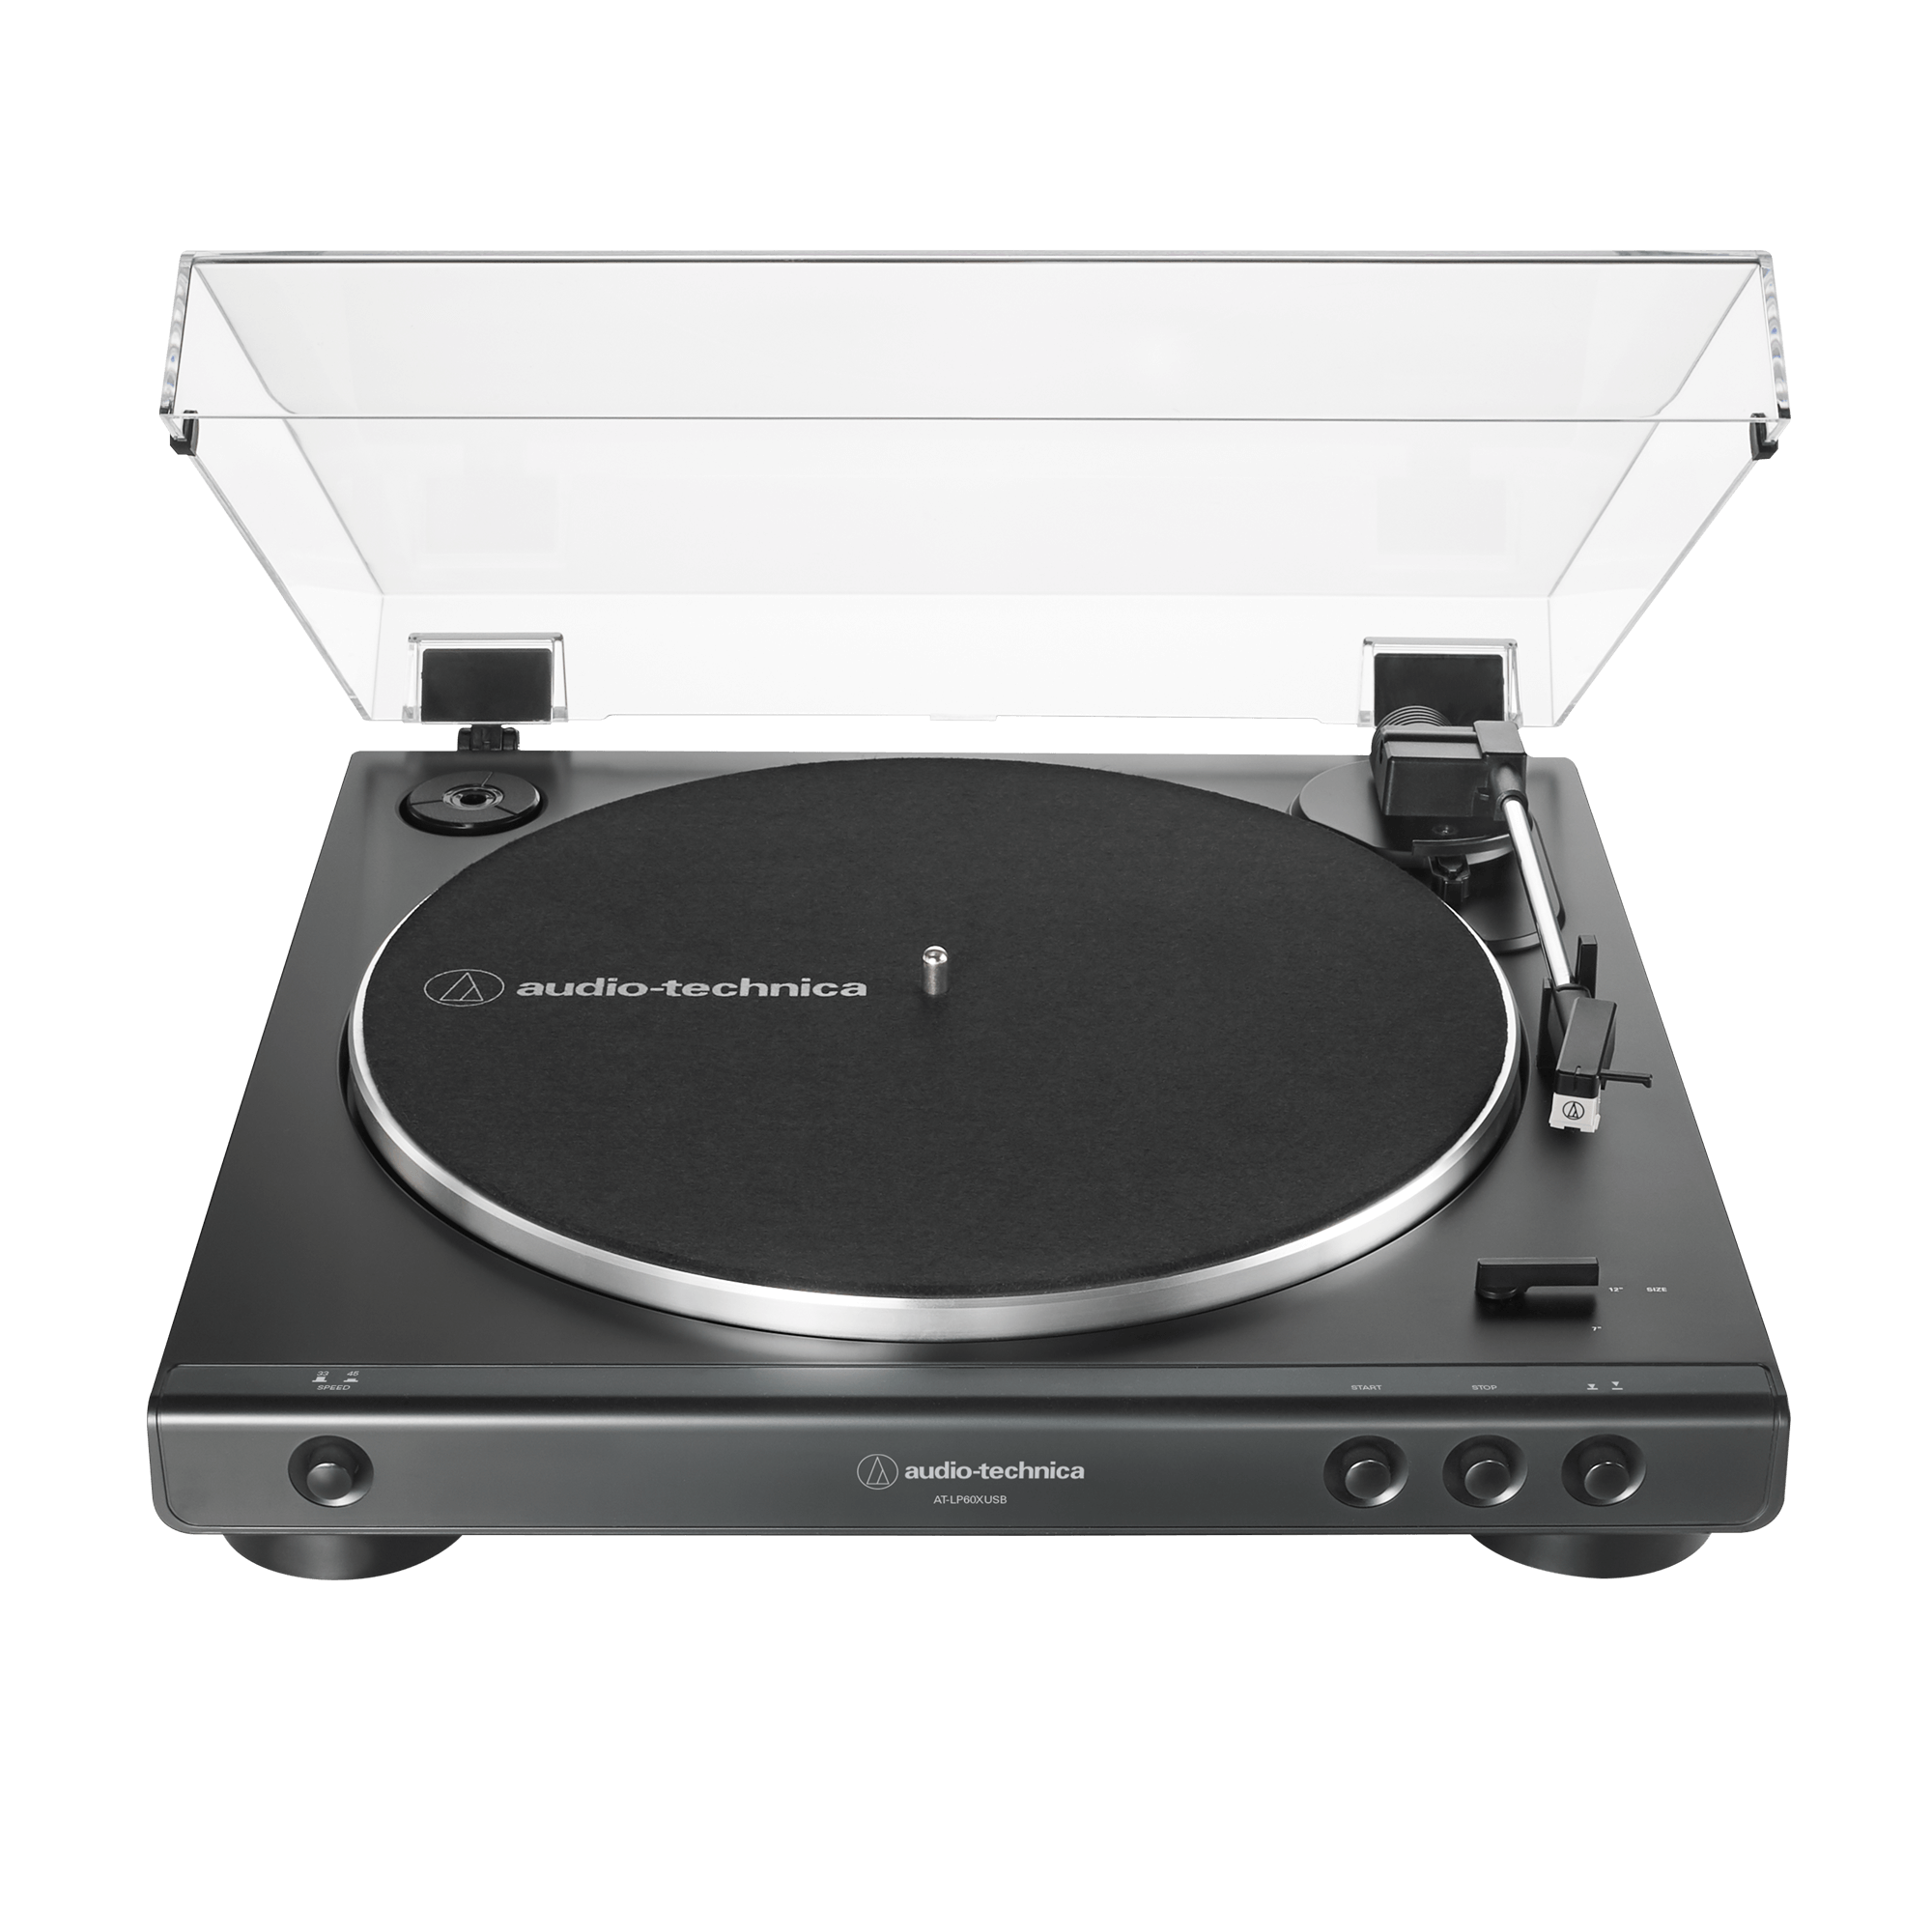 Album artwork for Album artwork for AT-LP60XUSB Fully Automatic Stereo USB Turntable by Audio-Technica by AT-LP60XUSB Fully Automatic Stereo USB Turntable - Audio-Technica